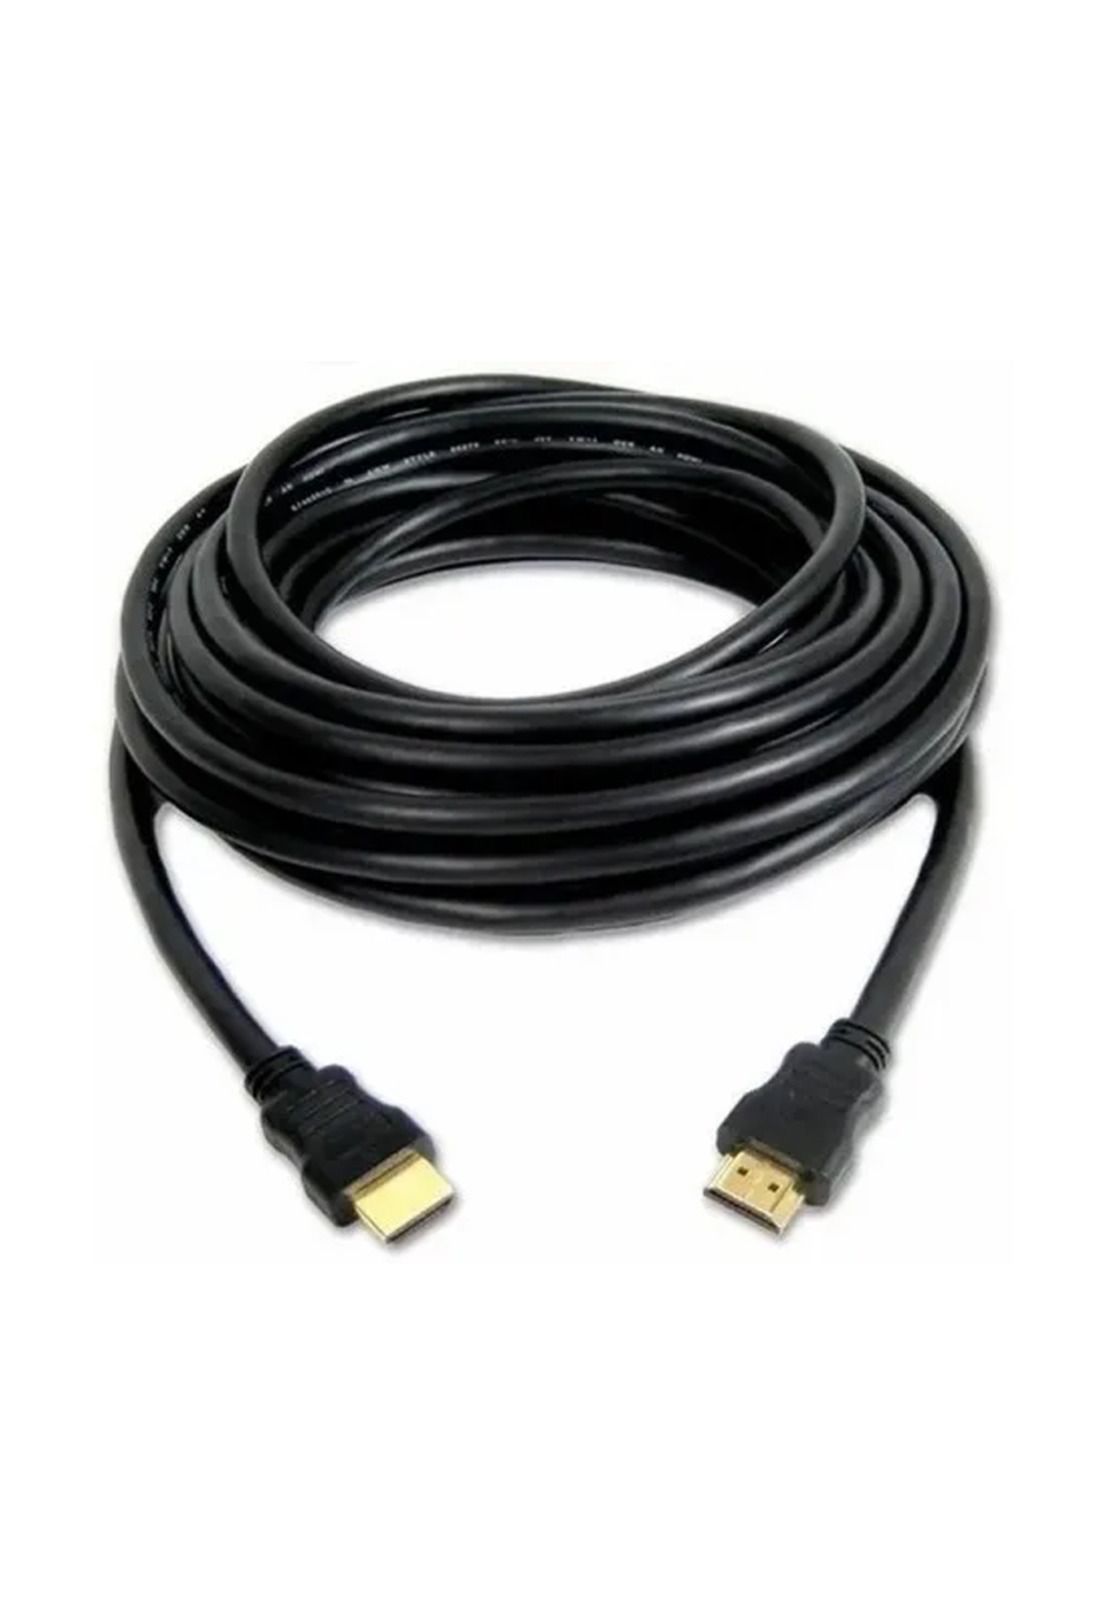 Cable Transferencia Ultra Audio y Video 5mts V1.4 HDTV